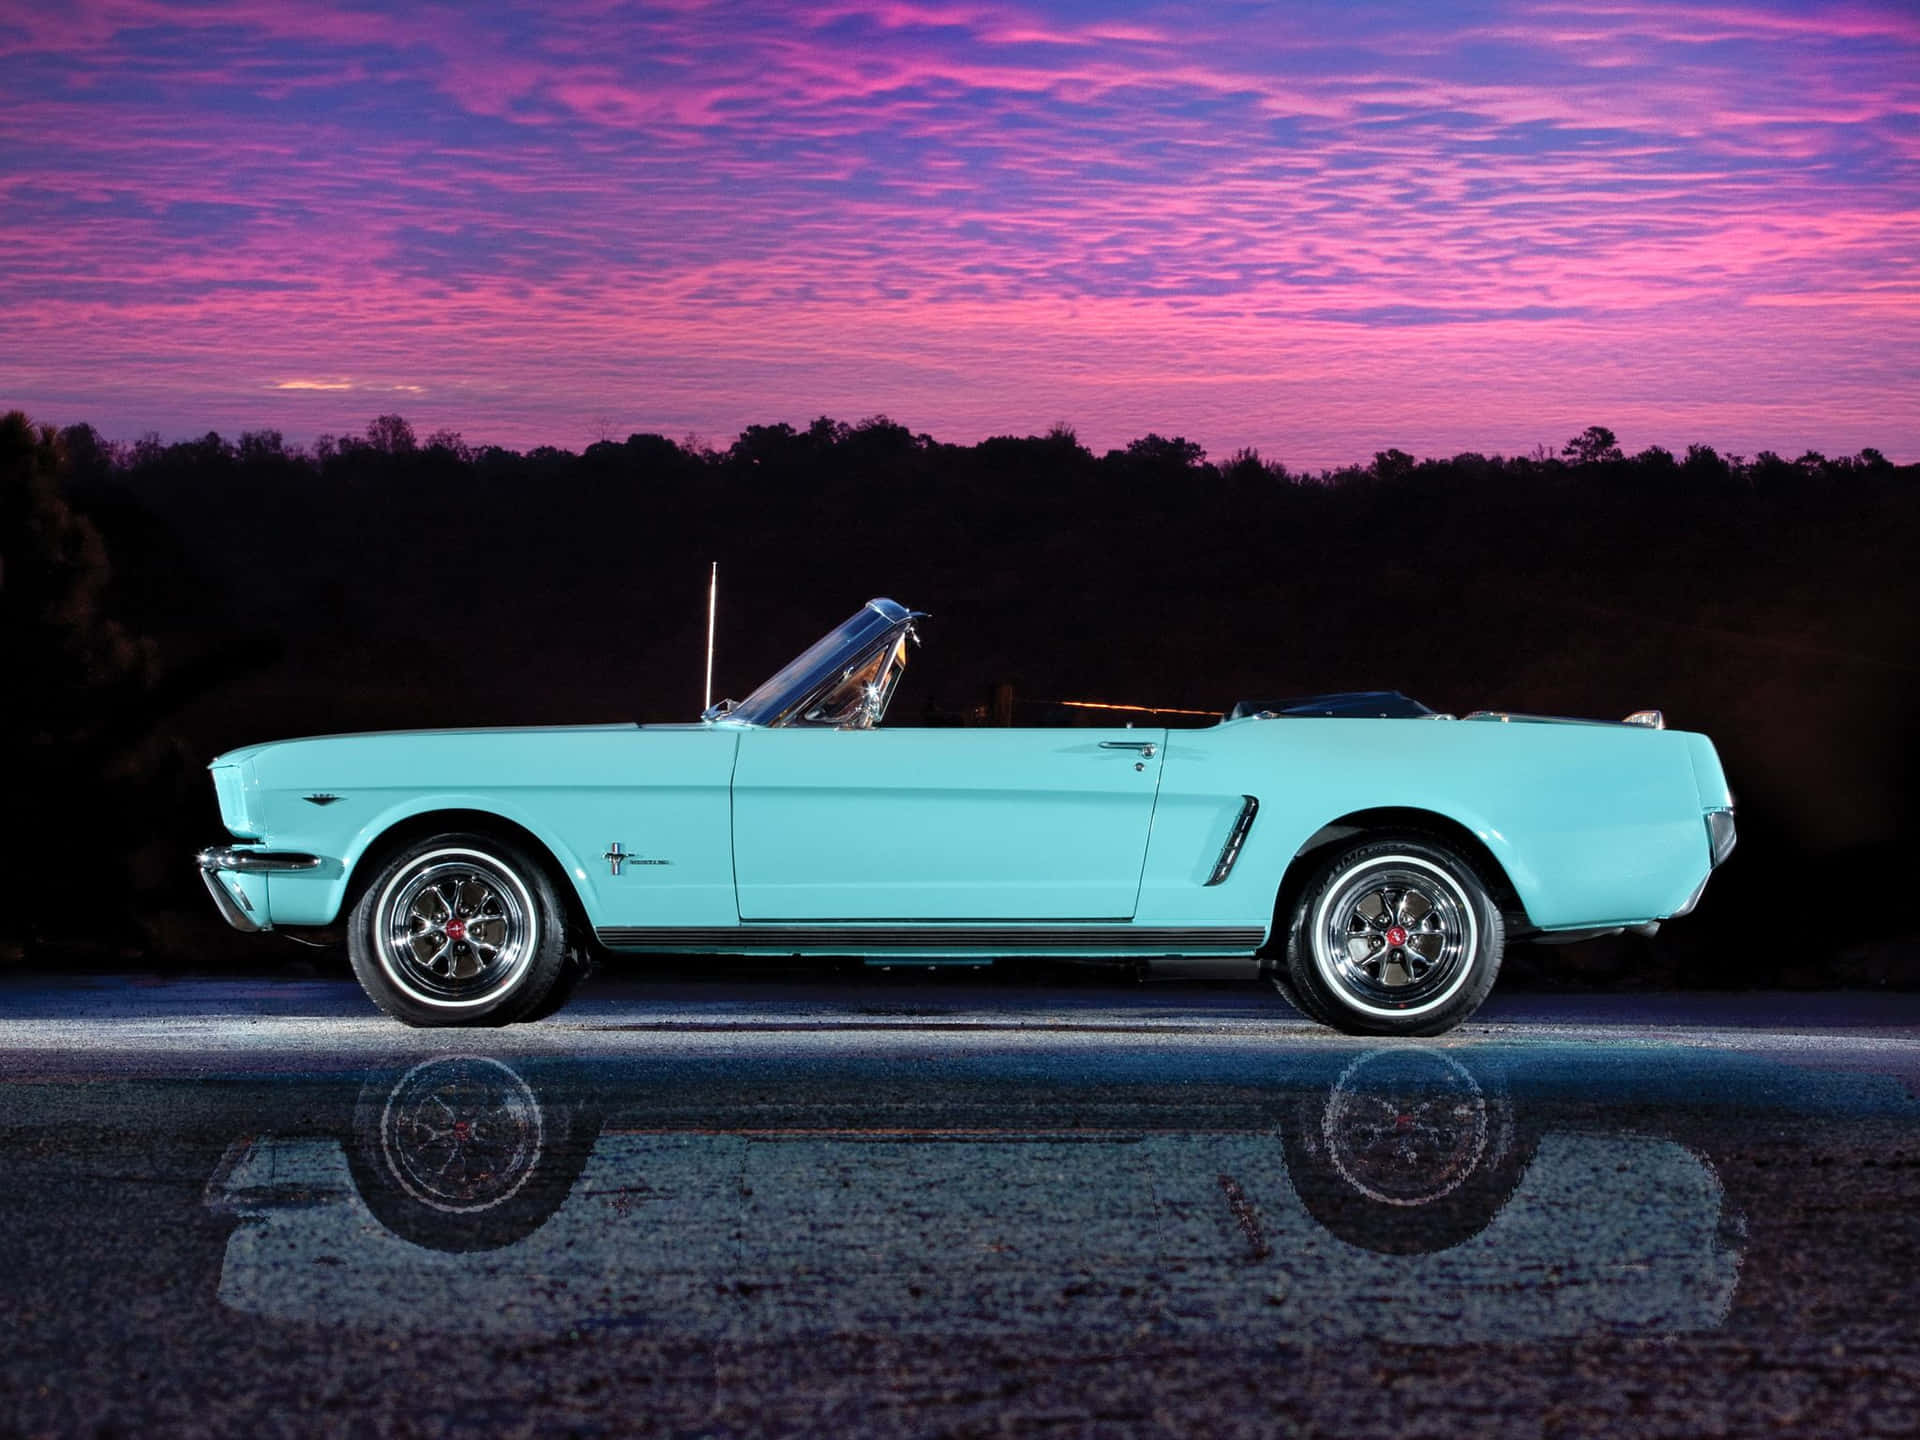 Caption: Majestic Ford Mustang Gt Convertible Cruising In The Sunset Wallpaper